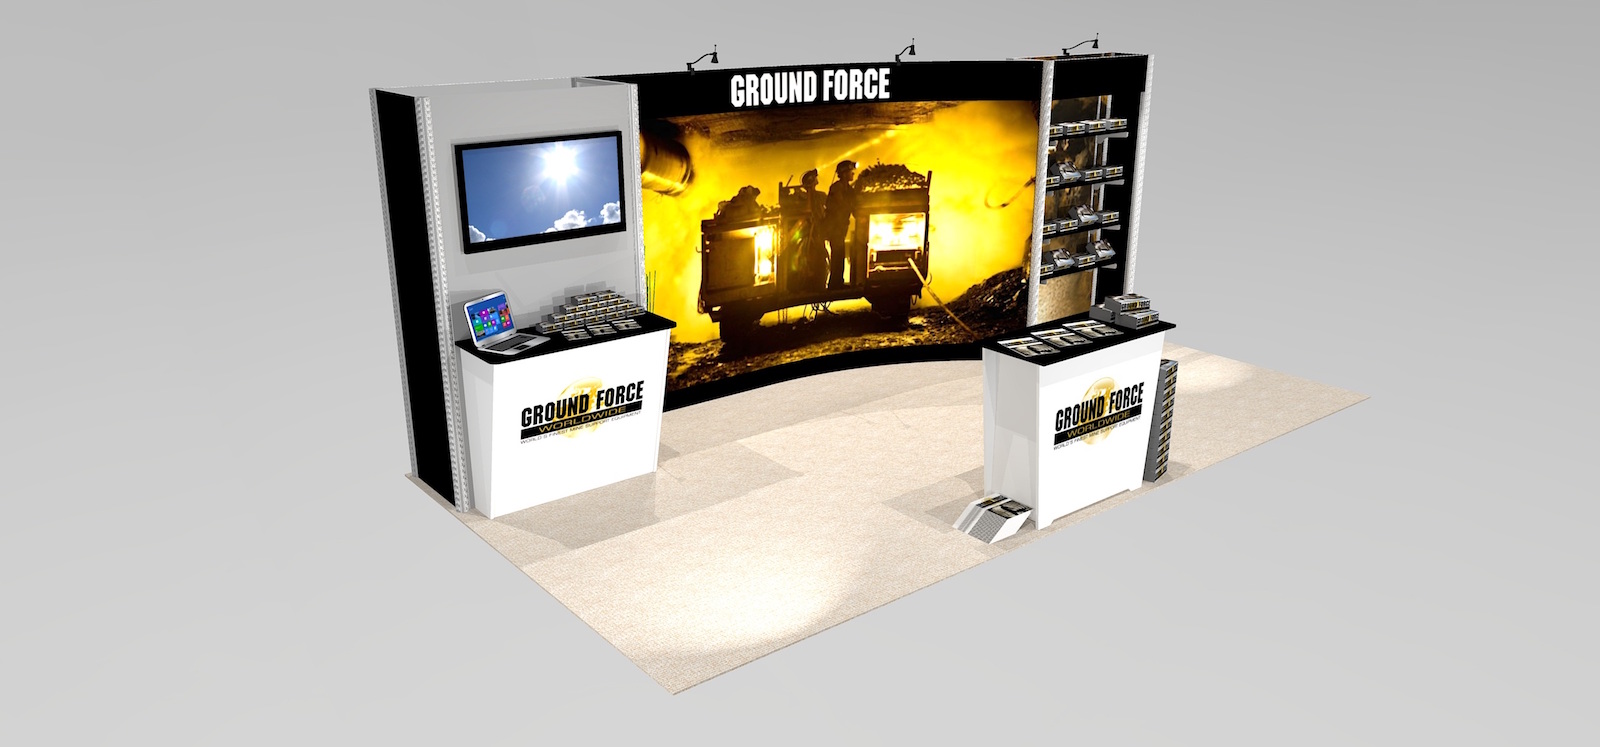 The IM2 trade show exhibit display is a10 x 20 inline and provides product shelving, and a flat screen work station with plenty of writing space. The backlit back wall counter with a large mural graphic, reception counter with space for writing and plenty of storage. View 3